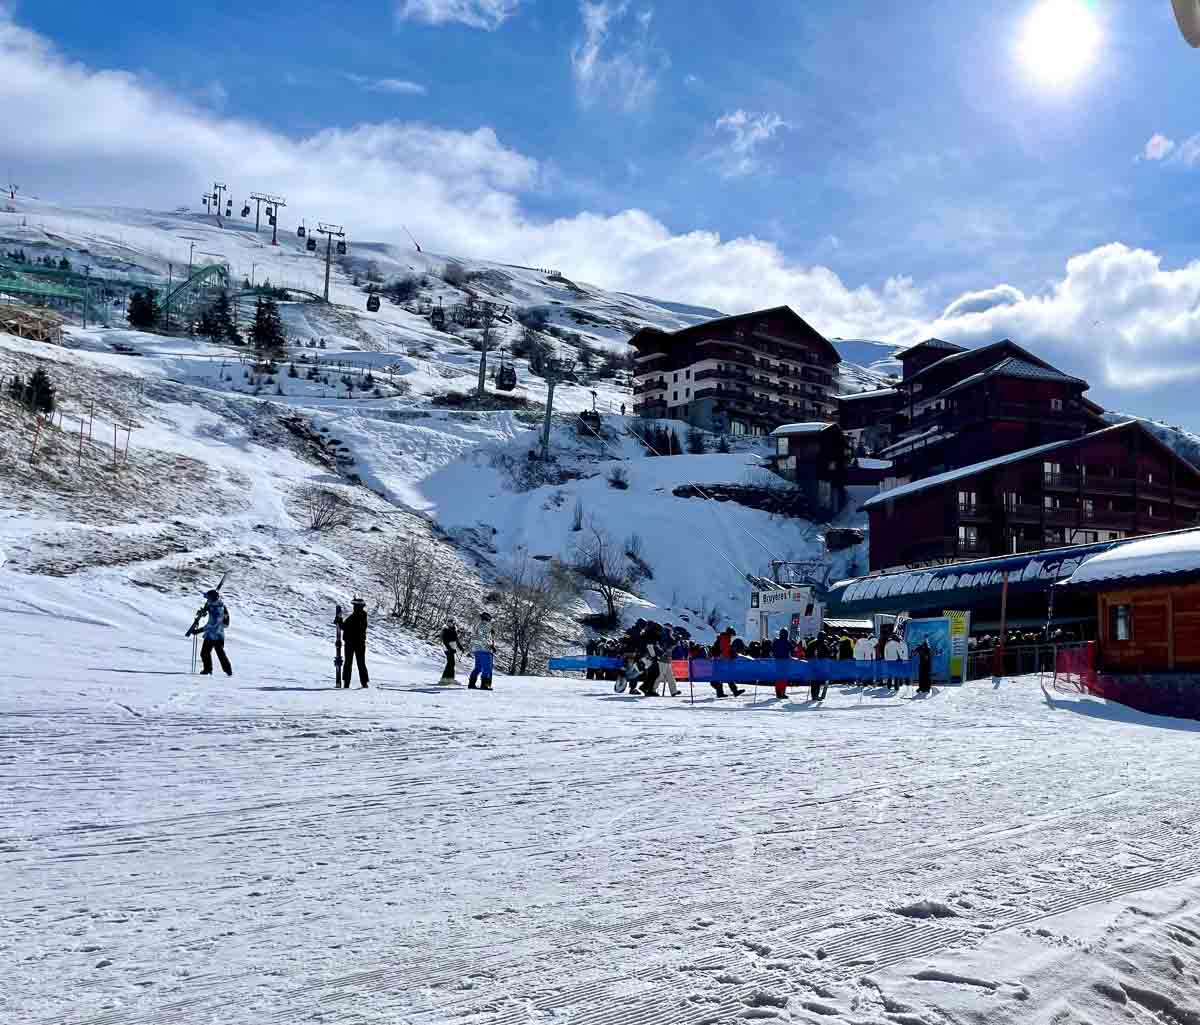 Les Bruyeres base area, with chalets up hill and a gondola